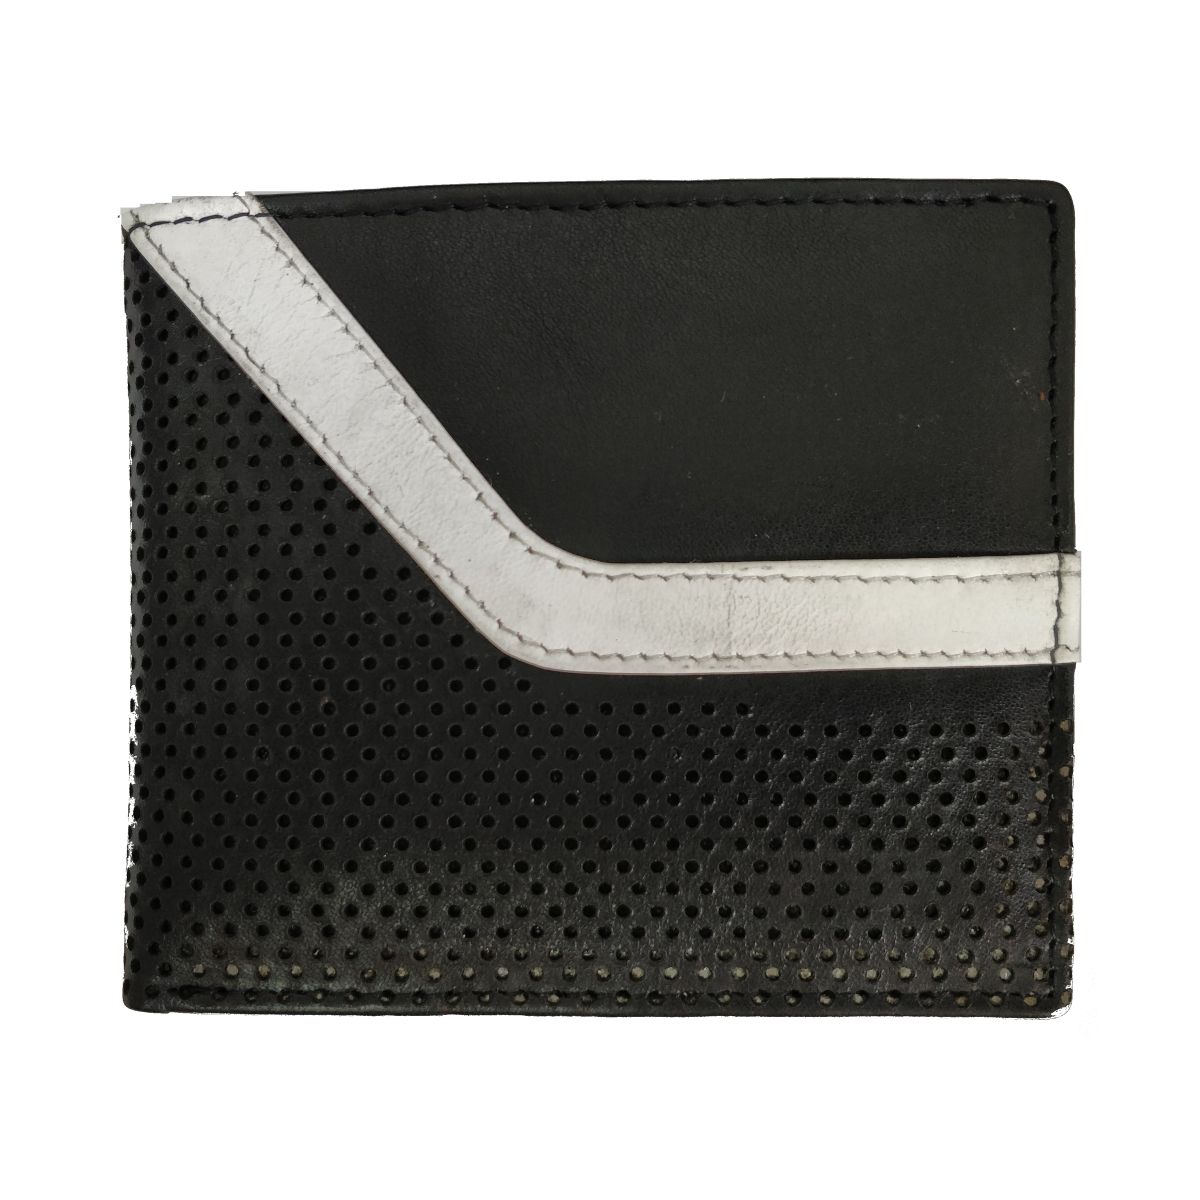 solo Leather Wallet With Broken Strip and Coin Pouch - Black/Blue